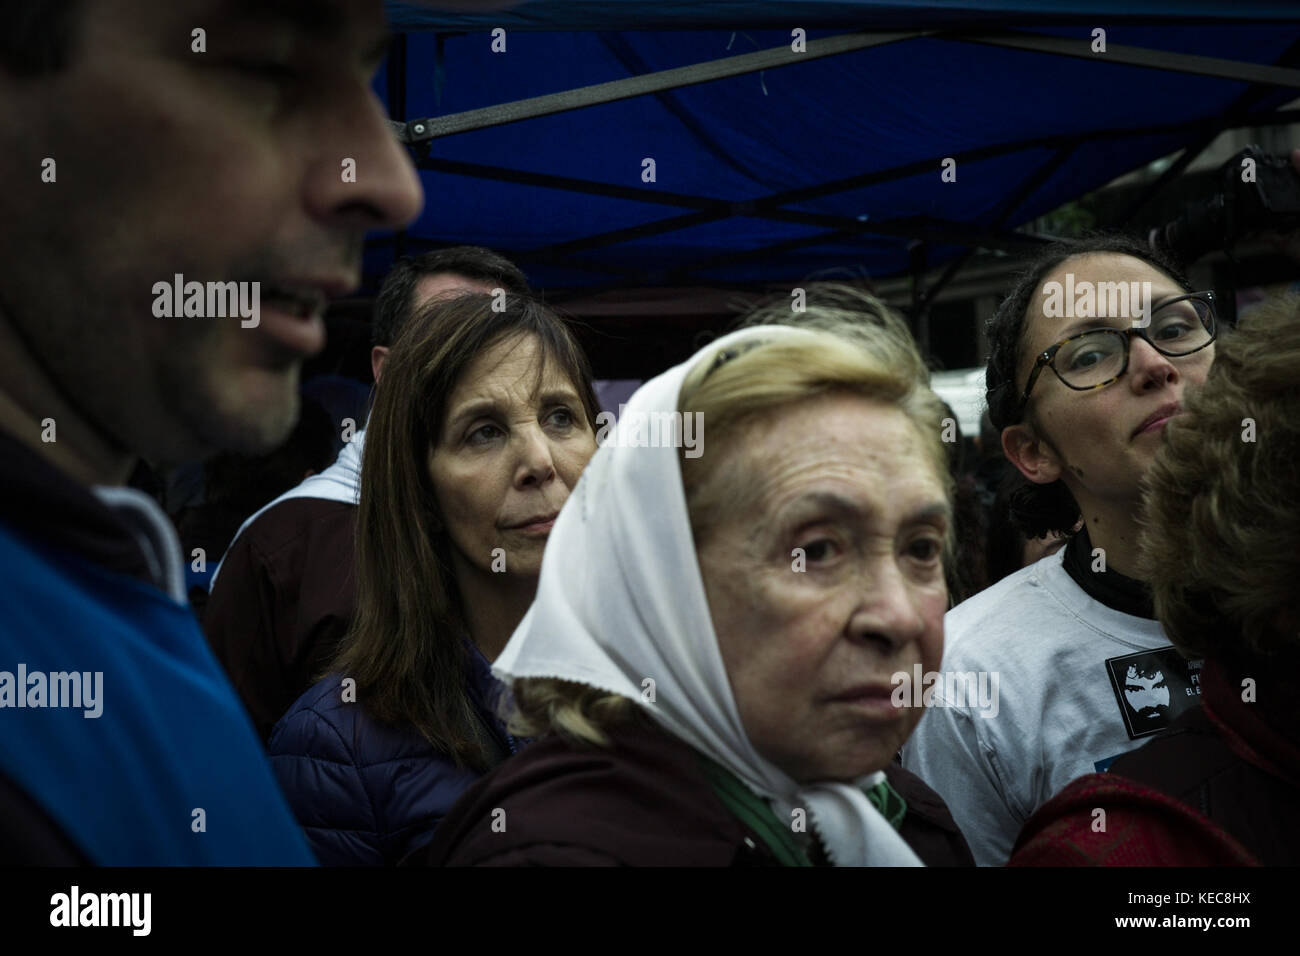 Federal Capital, Buenos Aires, Argentina. 30th Sep, 2017. The family of Santiago Maldonado is seen during a protest against the disappearance of Santiago Maldonado since 1 August 2017.Despite the rain, thousands of protesters gathered on Sunday in Plaza de Mayo hosted by the relatives and friends of Santiago Maldonado two months after his disappearance, after he was reportedly surrendering to Argentinian police guards during a raid on a camp of Mapuche protesters in Patagonia, south of Argentina. Various protests were seen in several other cities in Argentina, and abroad such as London, Stock Photo